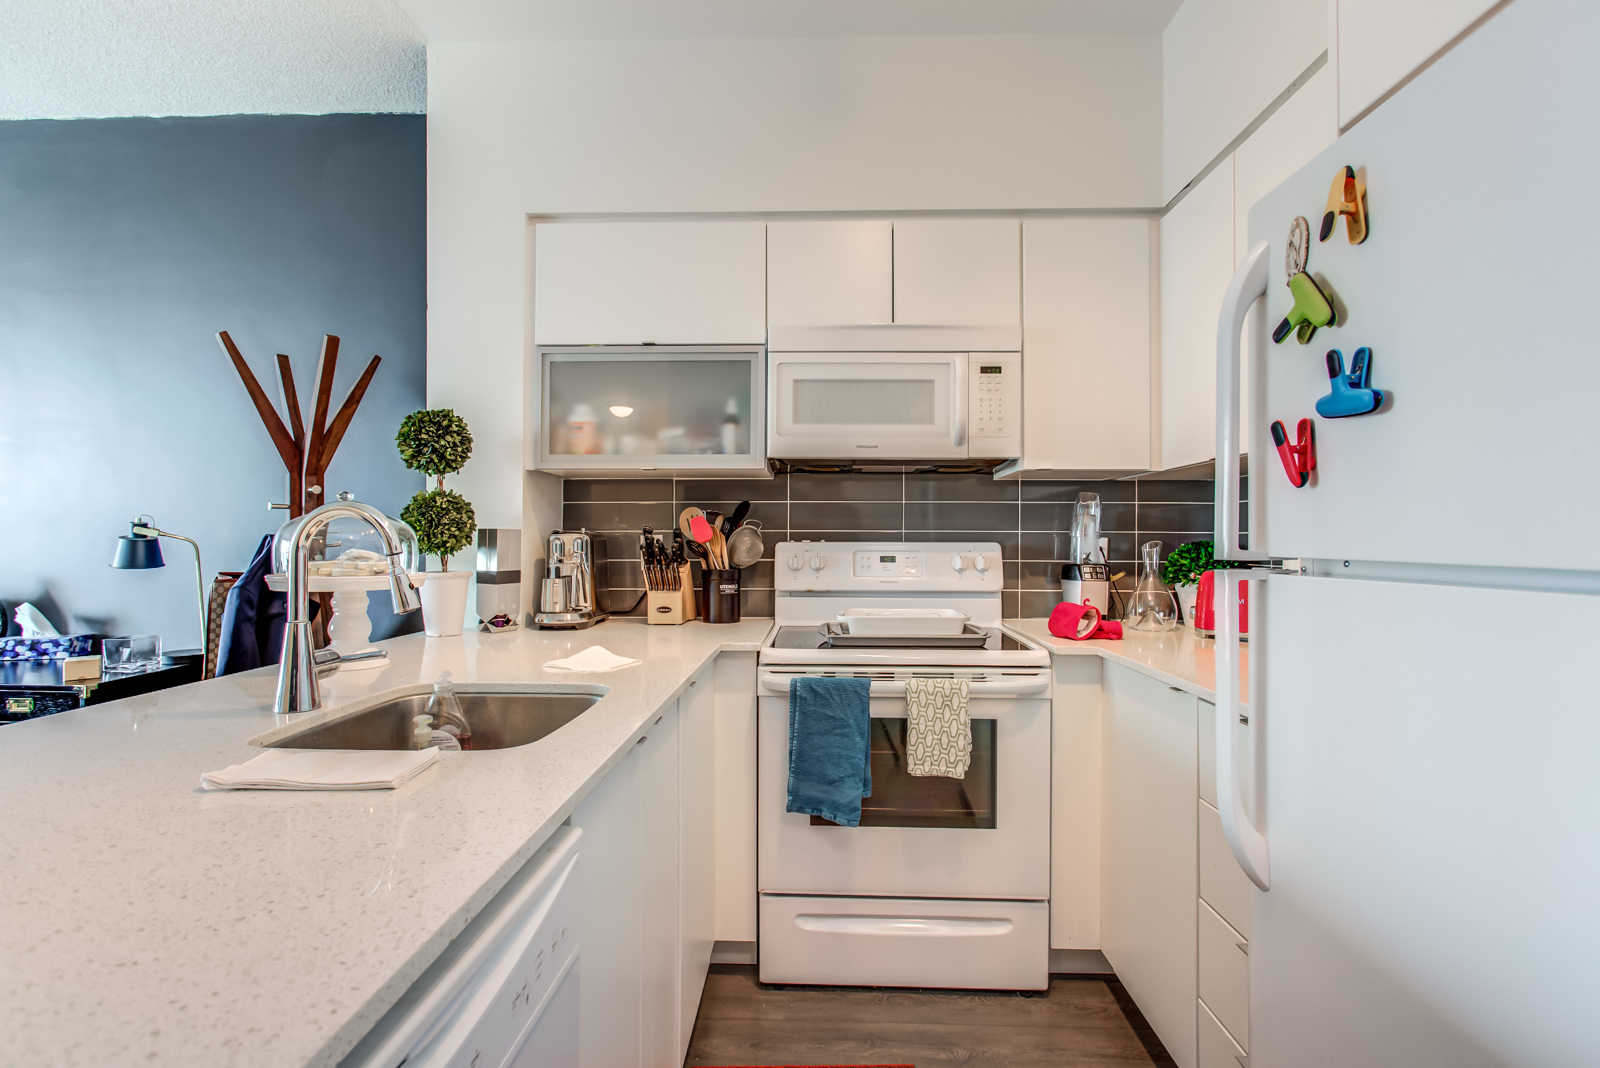 View of kitchen counters and appliances at 150 East Liberty St Unit 1616.